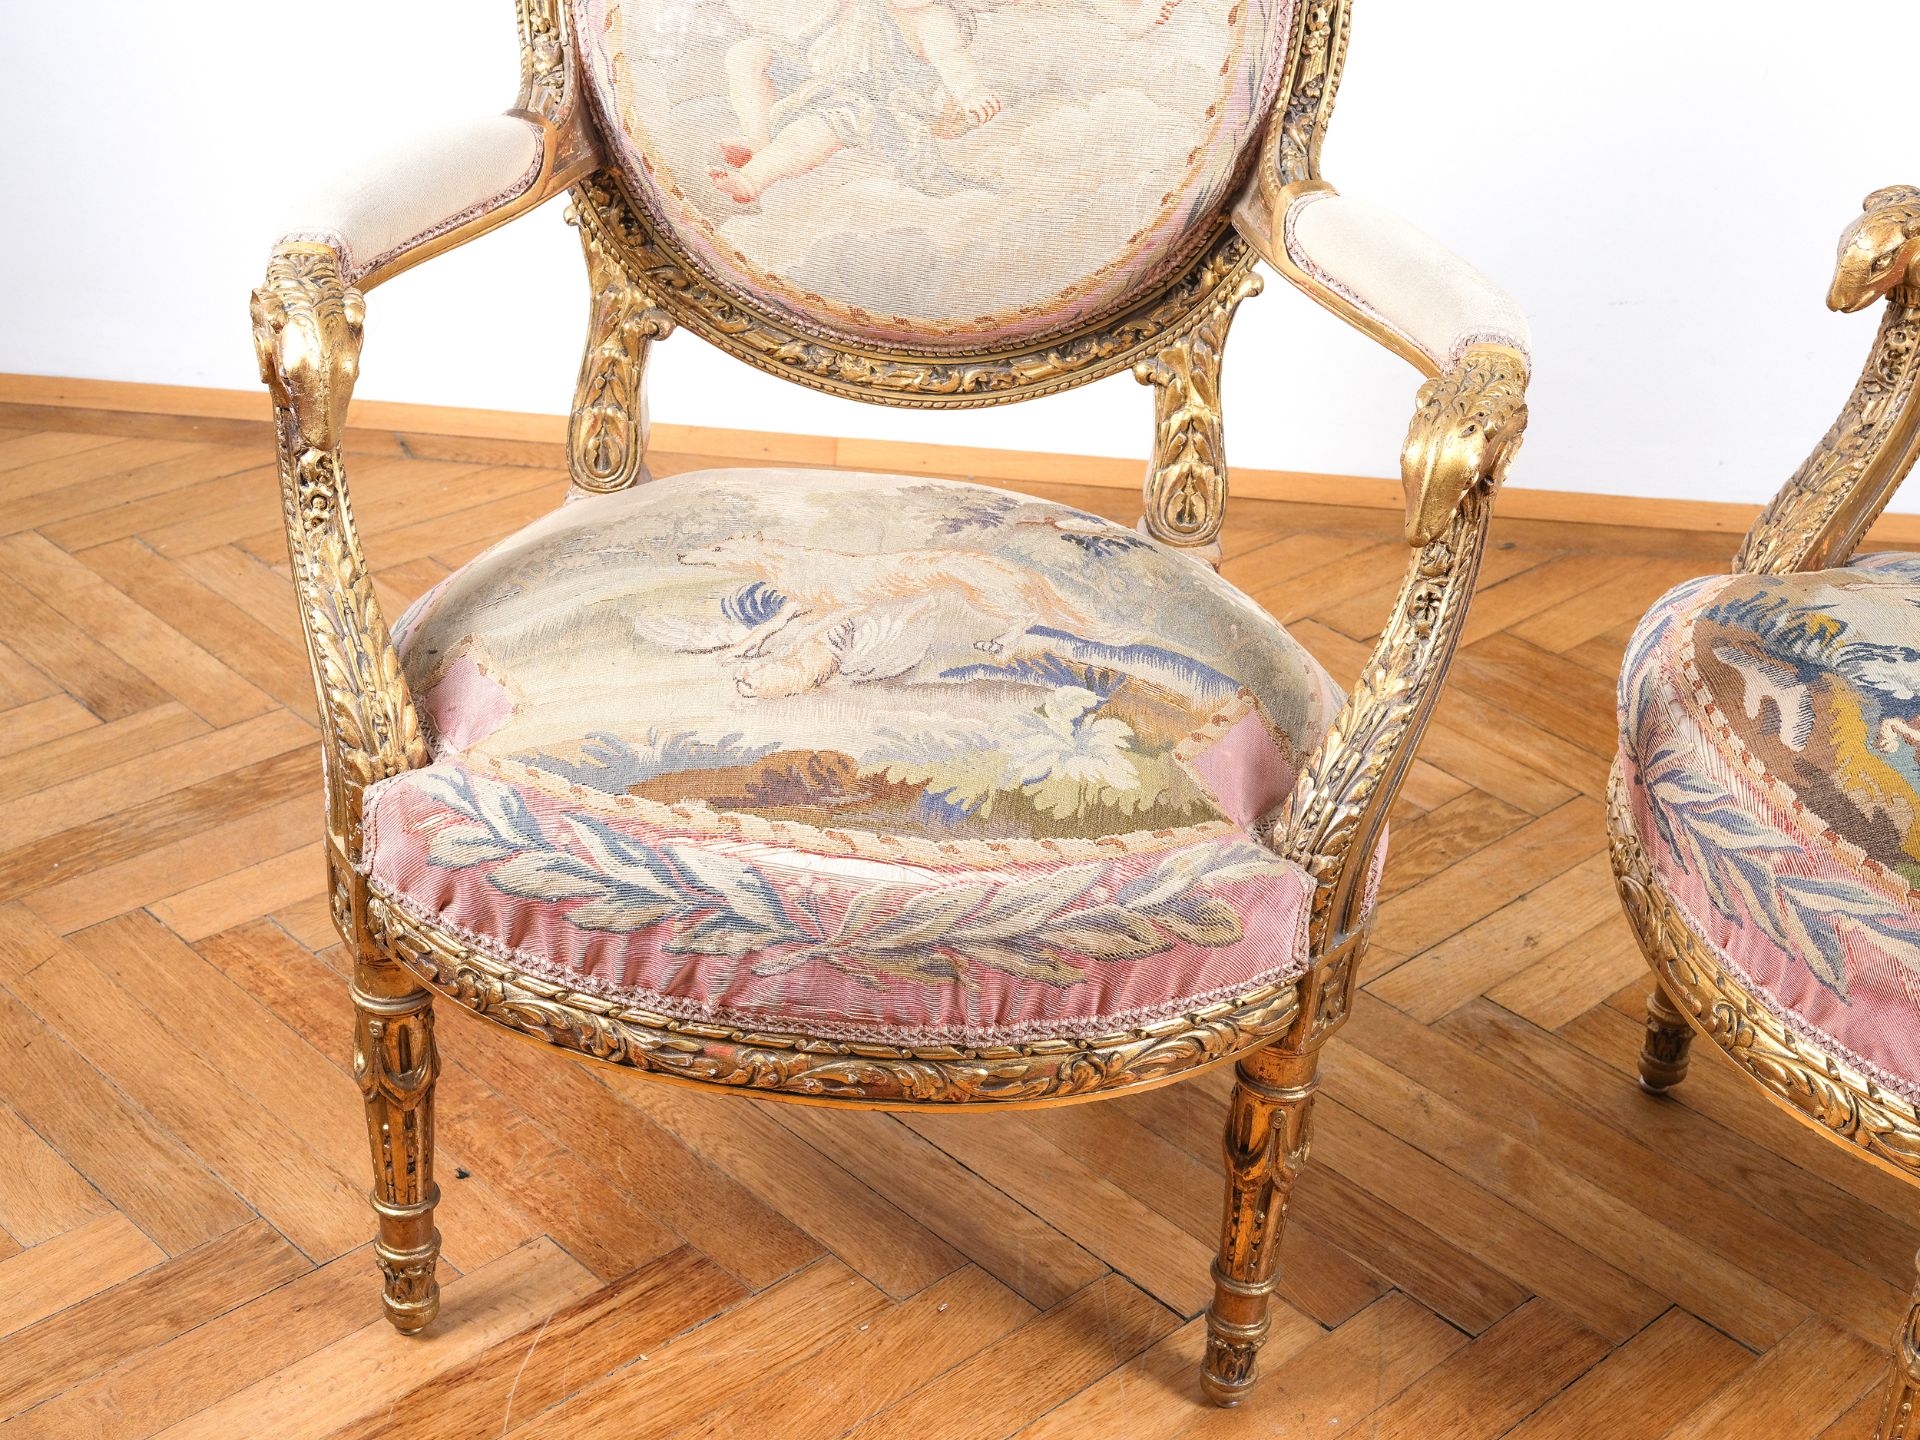 Five-piece seating set: 1 bench & 4 armchairs, Louis XVI style around 1900 - Image 4 of 8